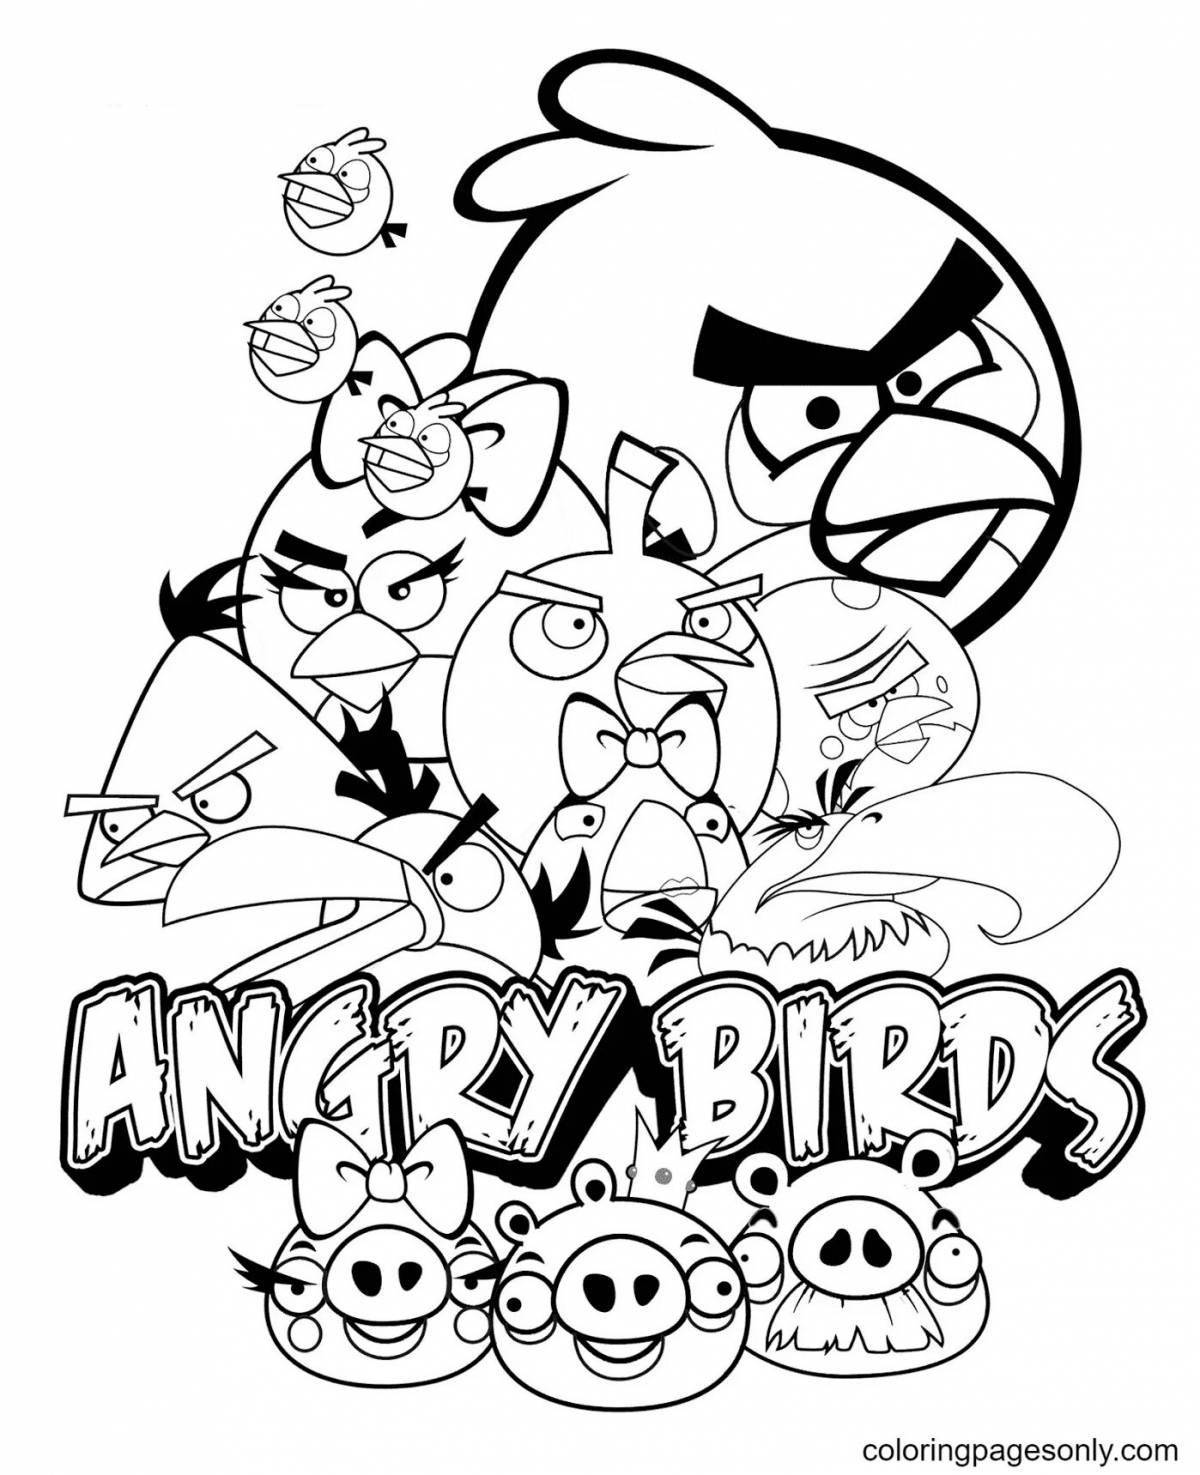 Innovative angry birds coloring book for kids